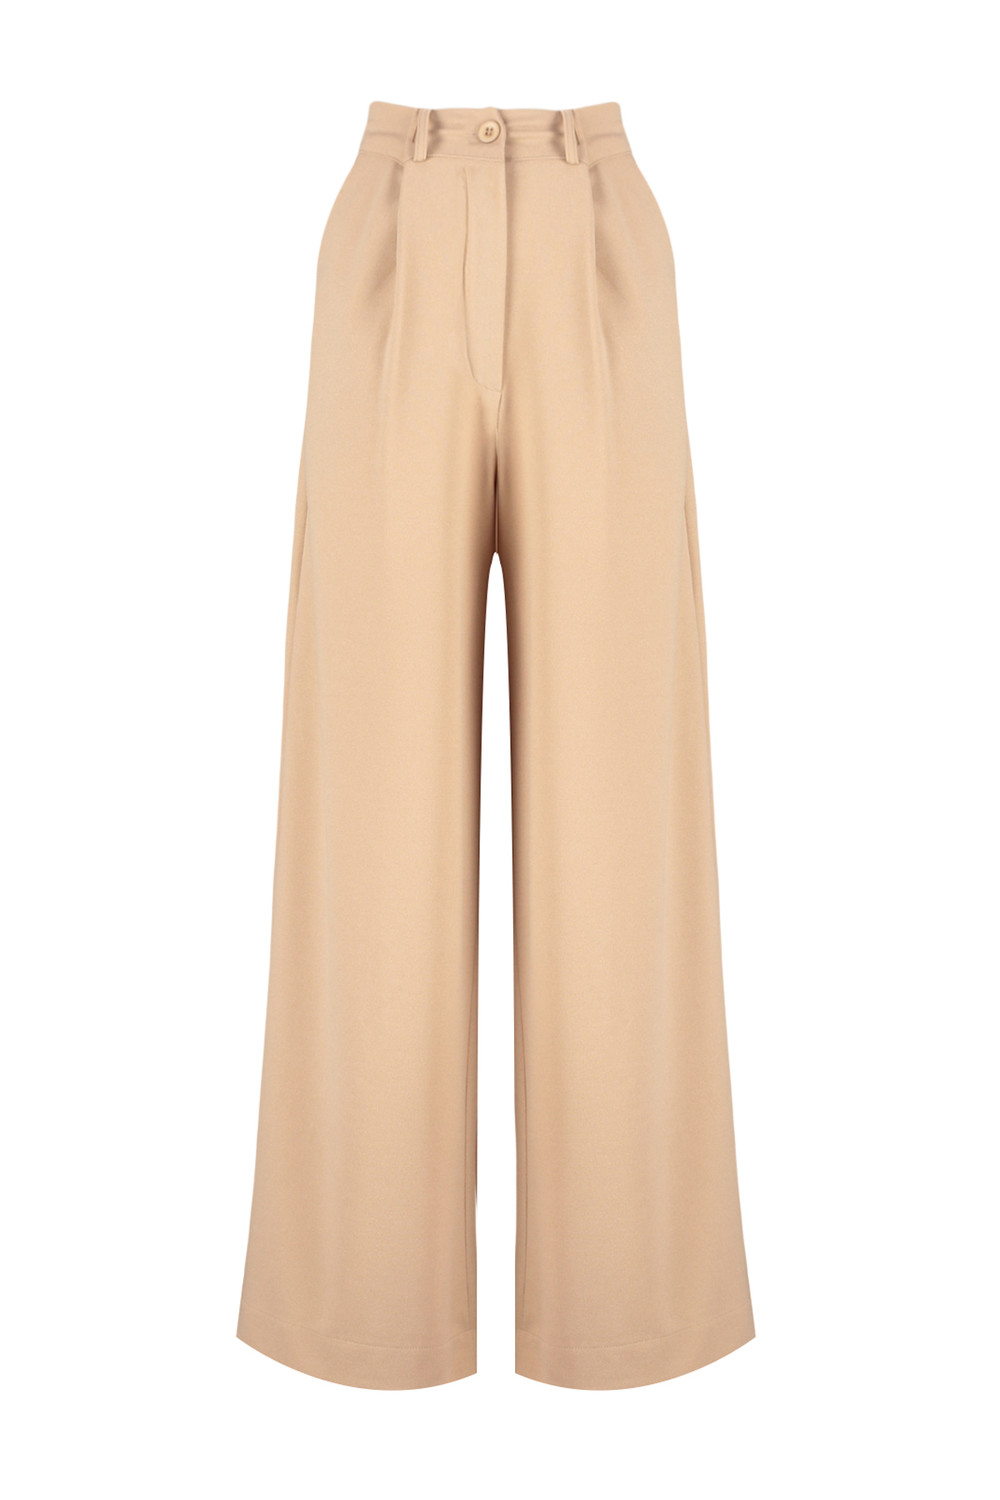 Trendyol Camel Extra Wide Leg/Wide Legs Crepe Knitted Trousers with Pleat Detail